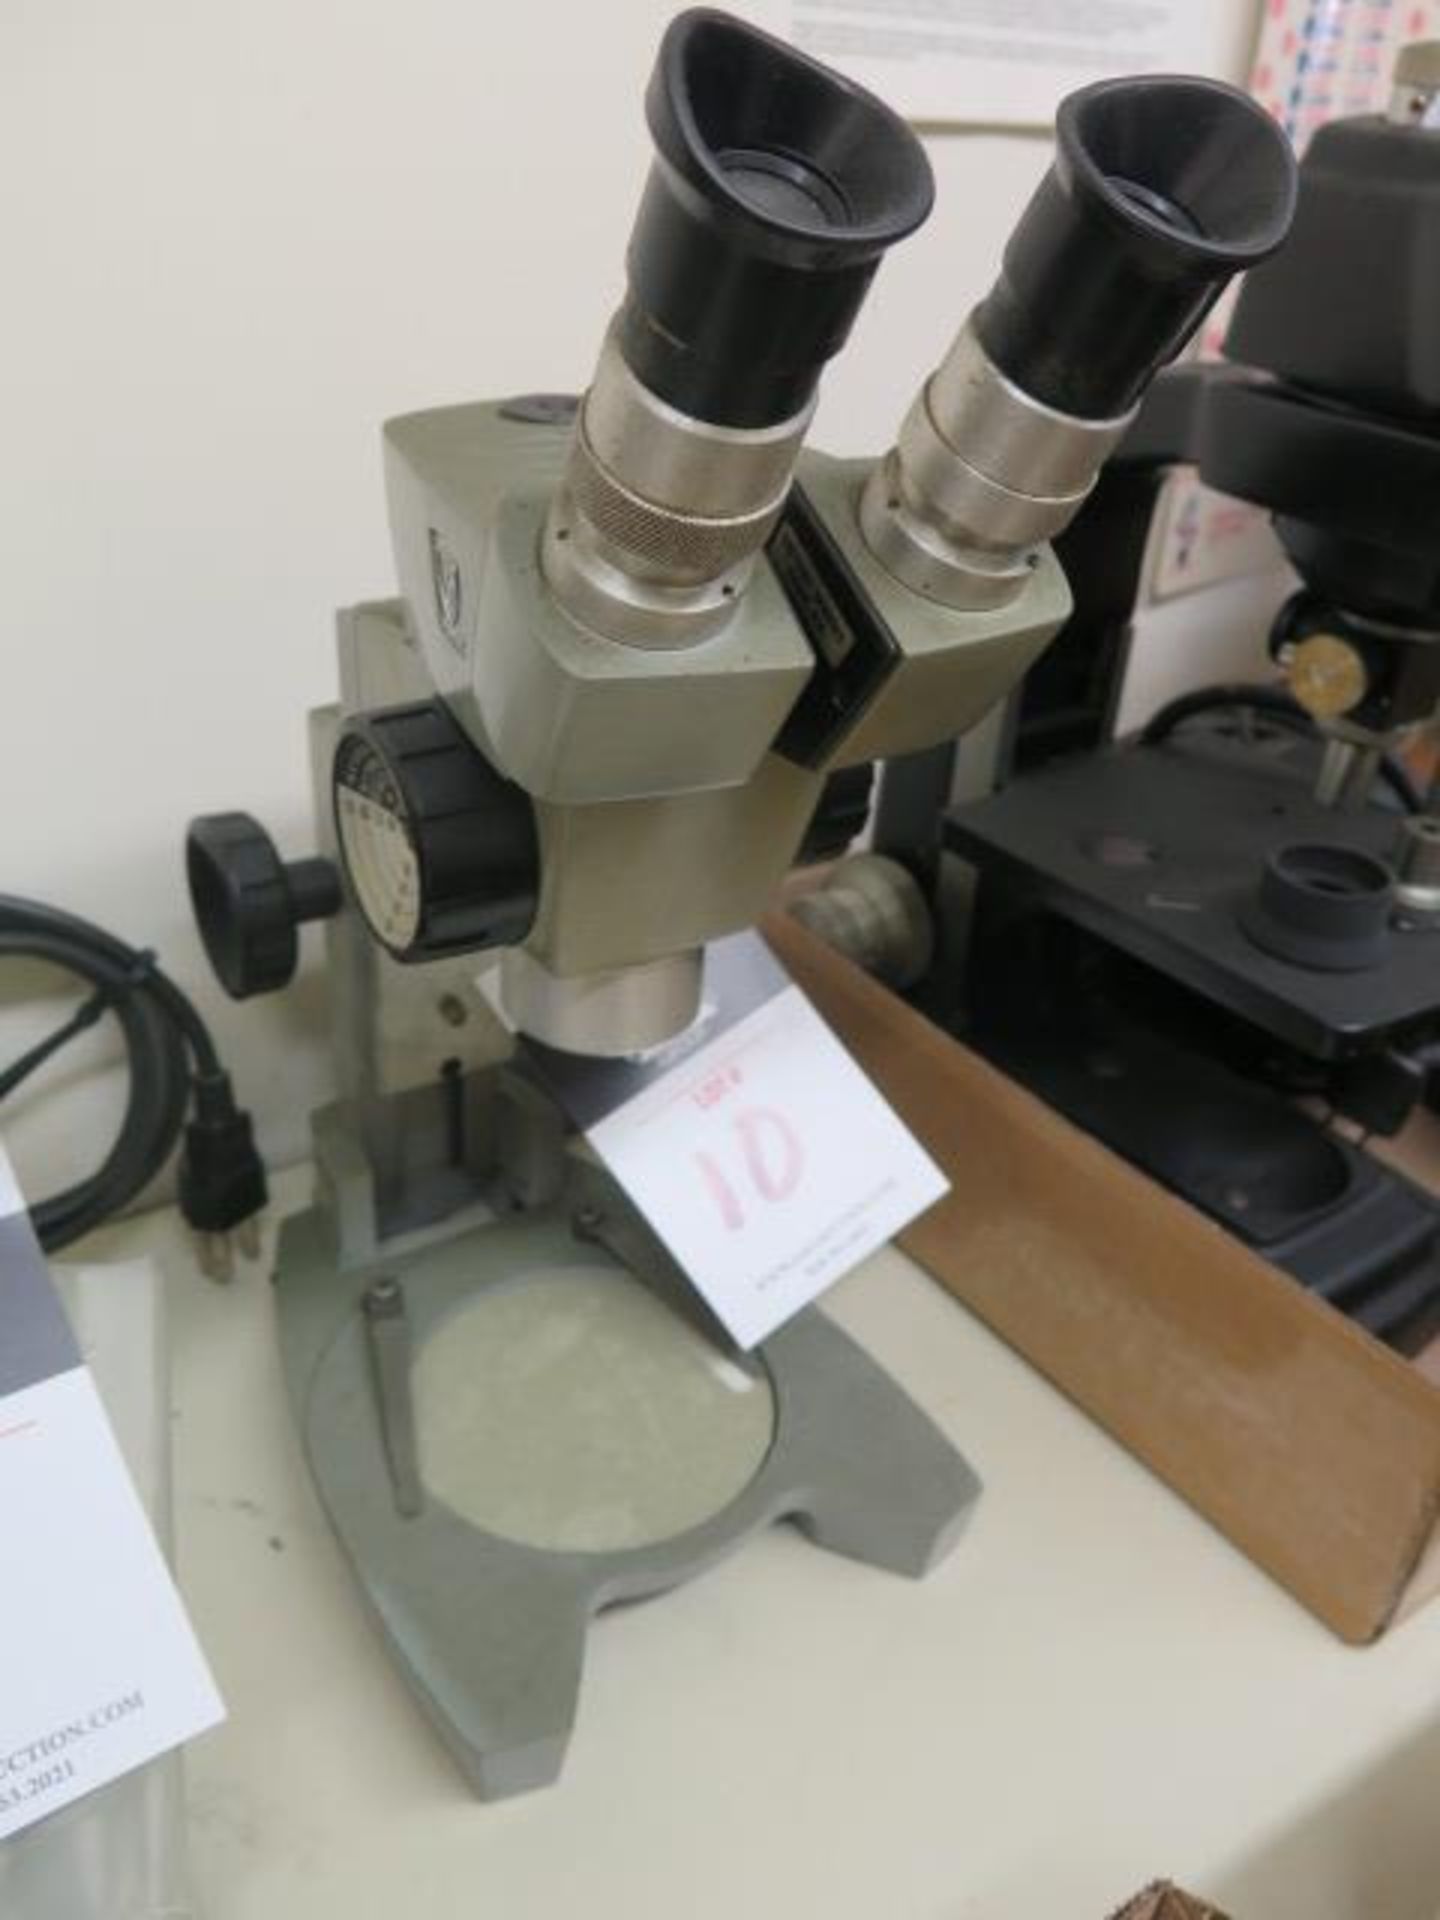 AO Stereo Microscope w/ Light Source (SOLD AS-IS - NO WARRANTY) - Image 2 of 4